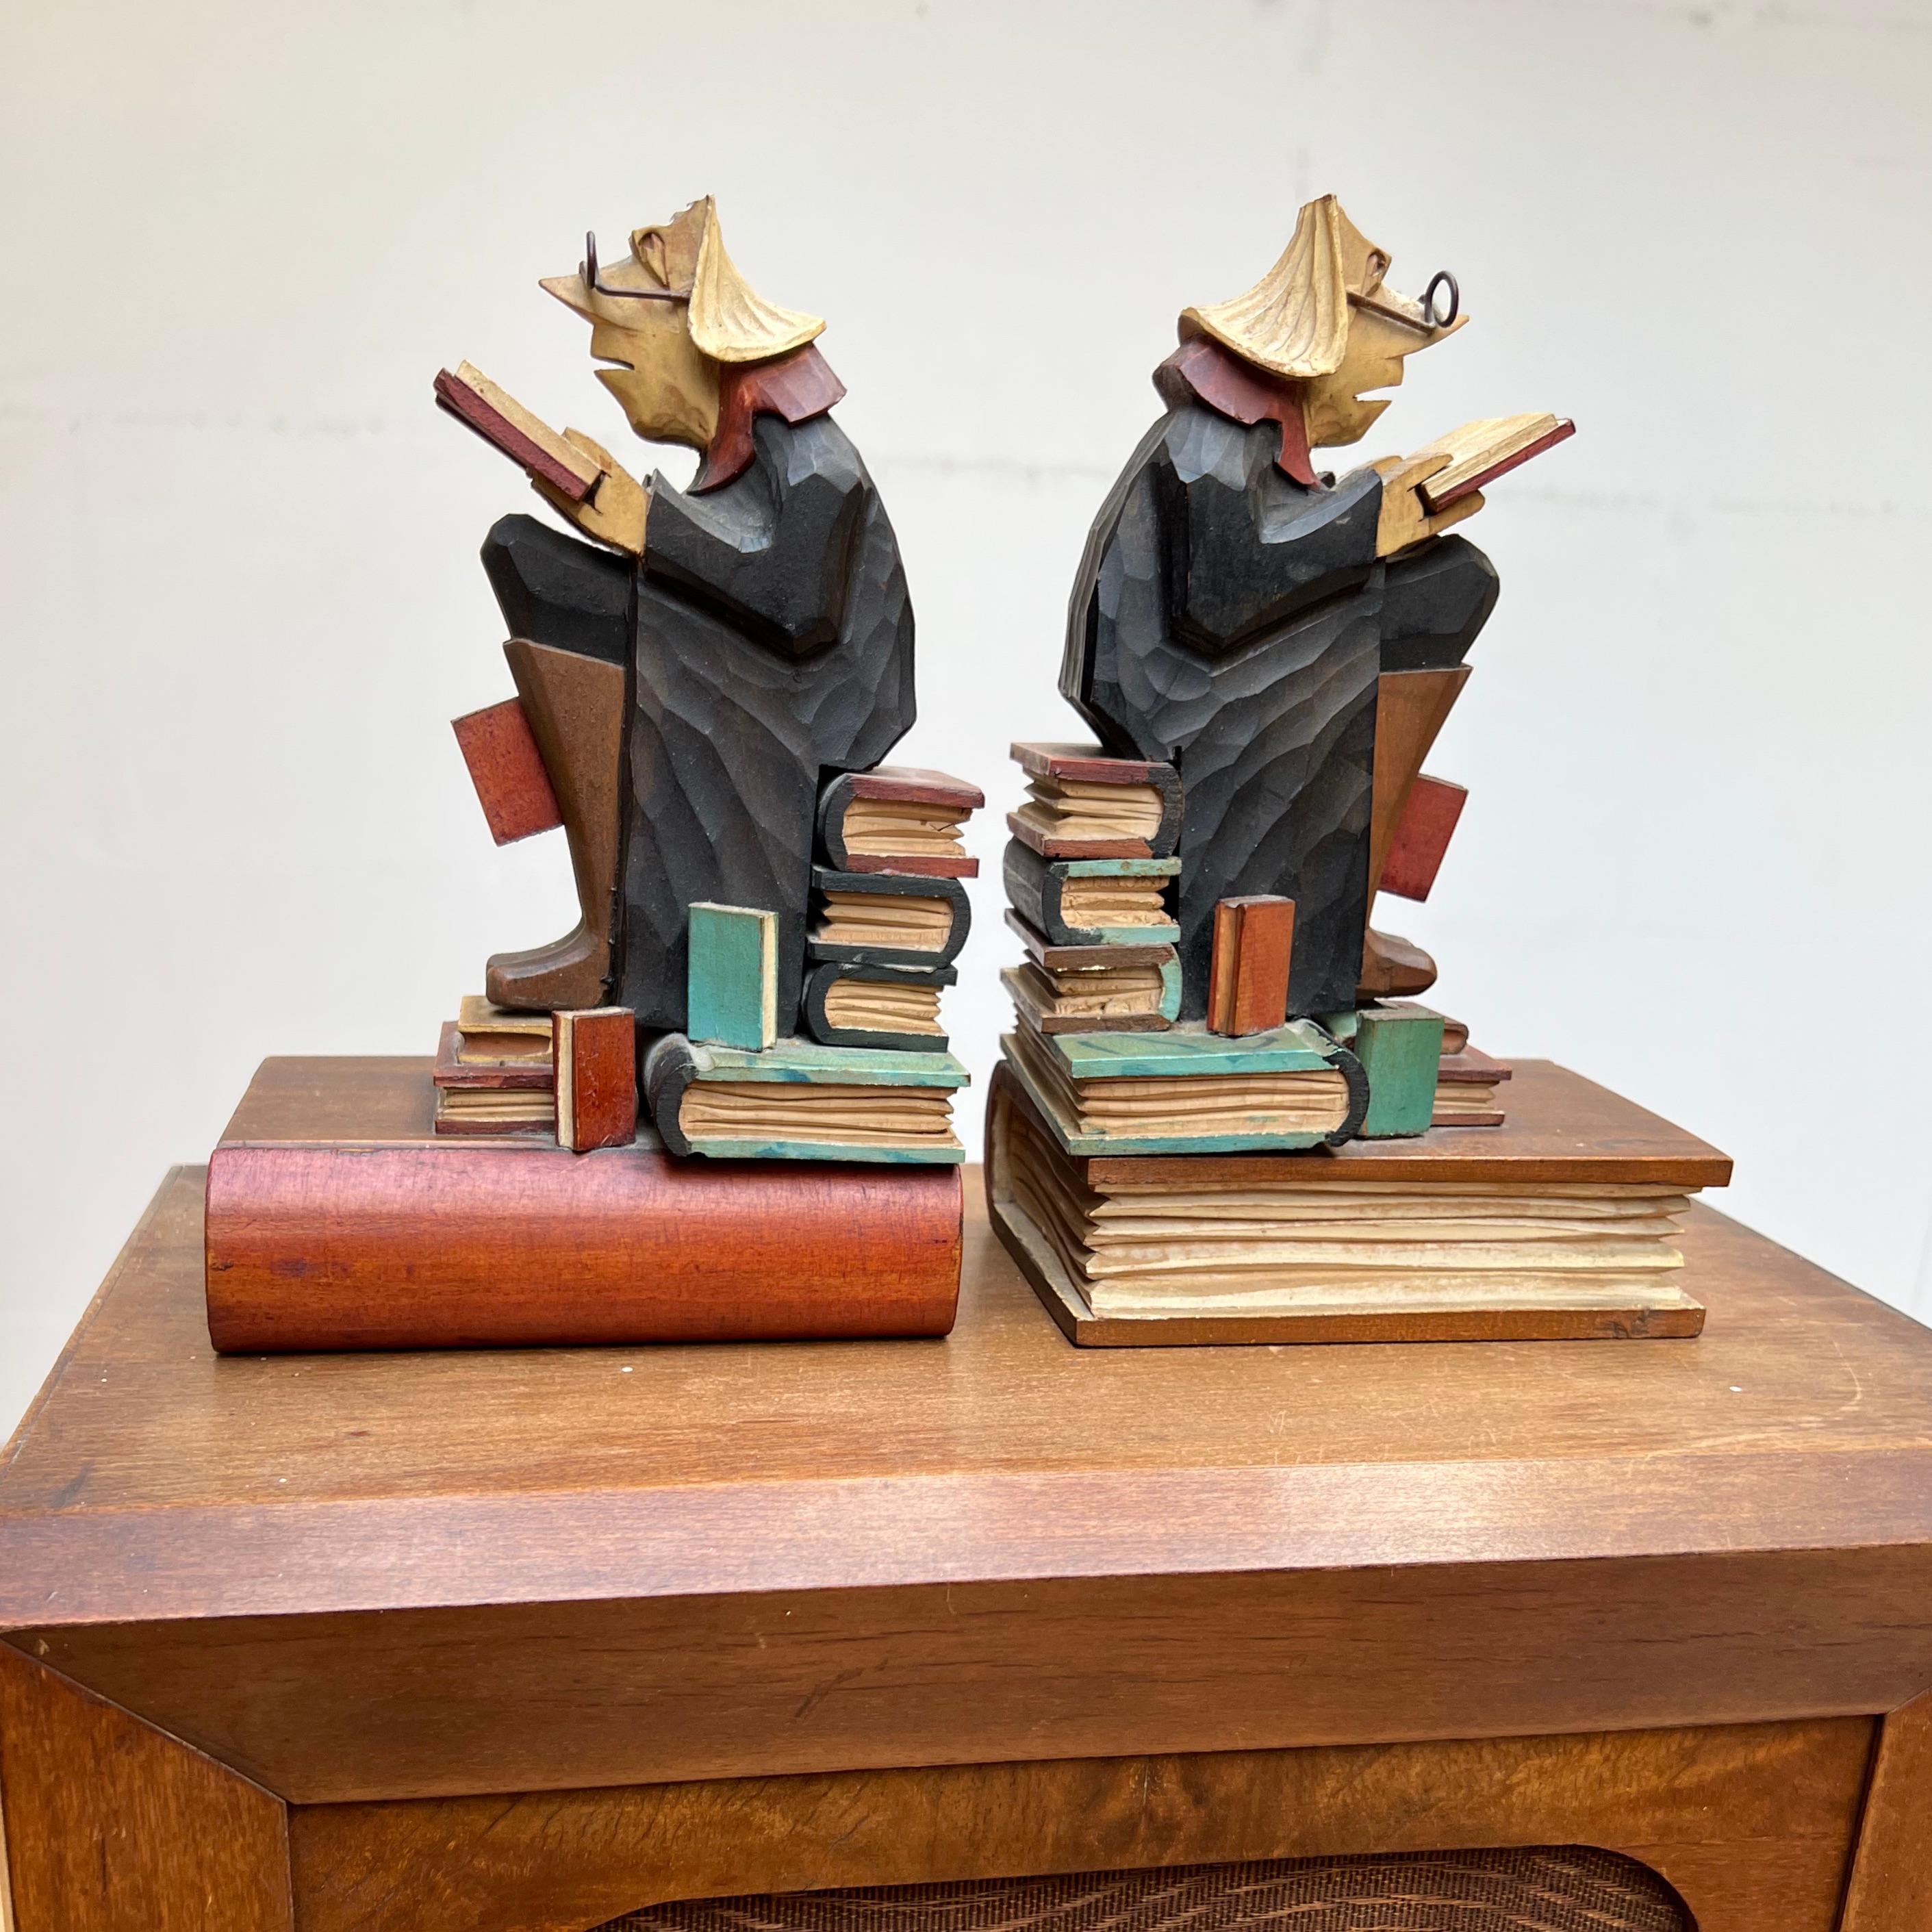 Rare, beautiful, practical, decorative and meaningful bookends.

In all our years of collecting, buying and selling antiques we have never seen a pair of alchemist bookends. They come from the same home as the alchemist painting that we published